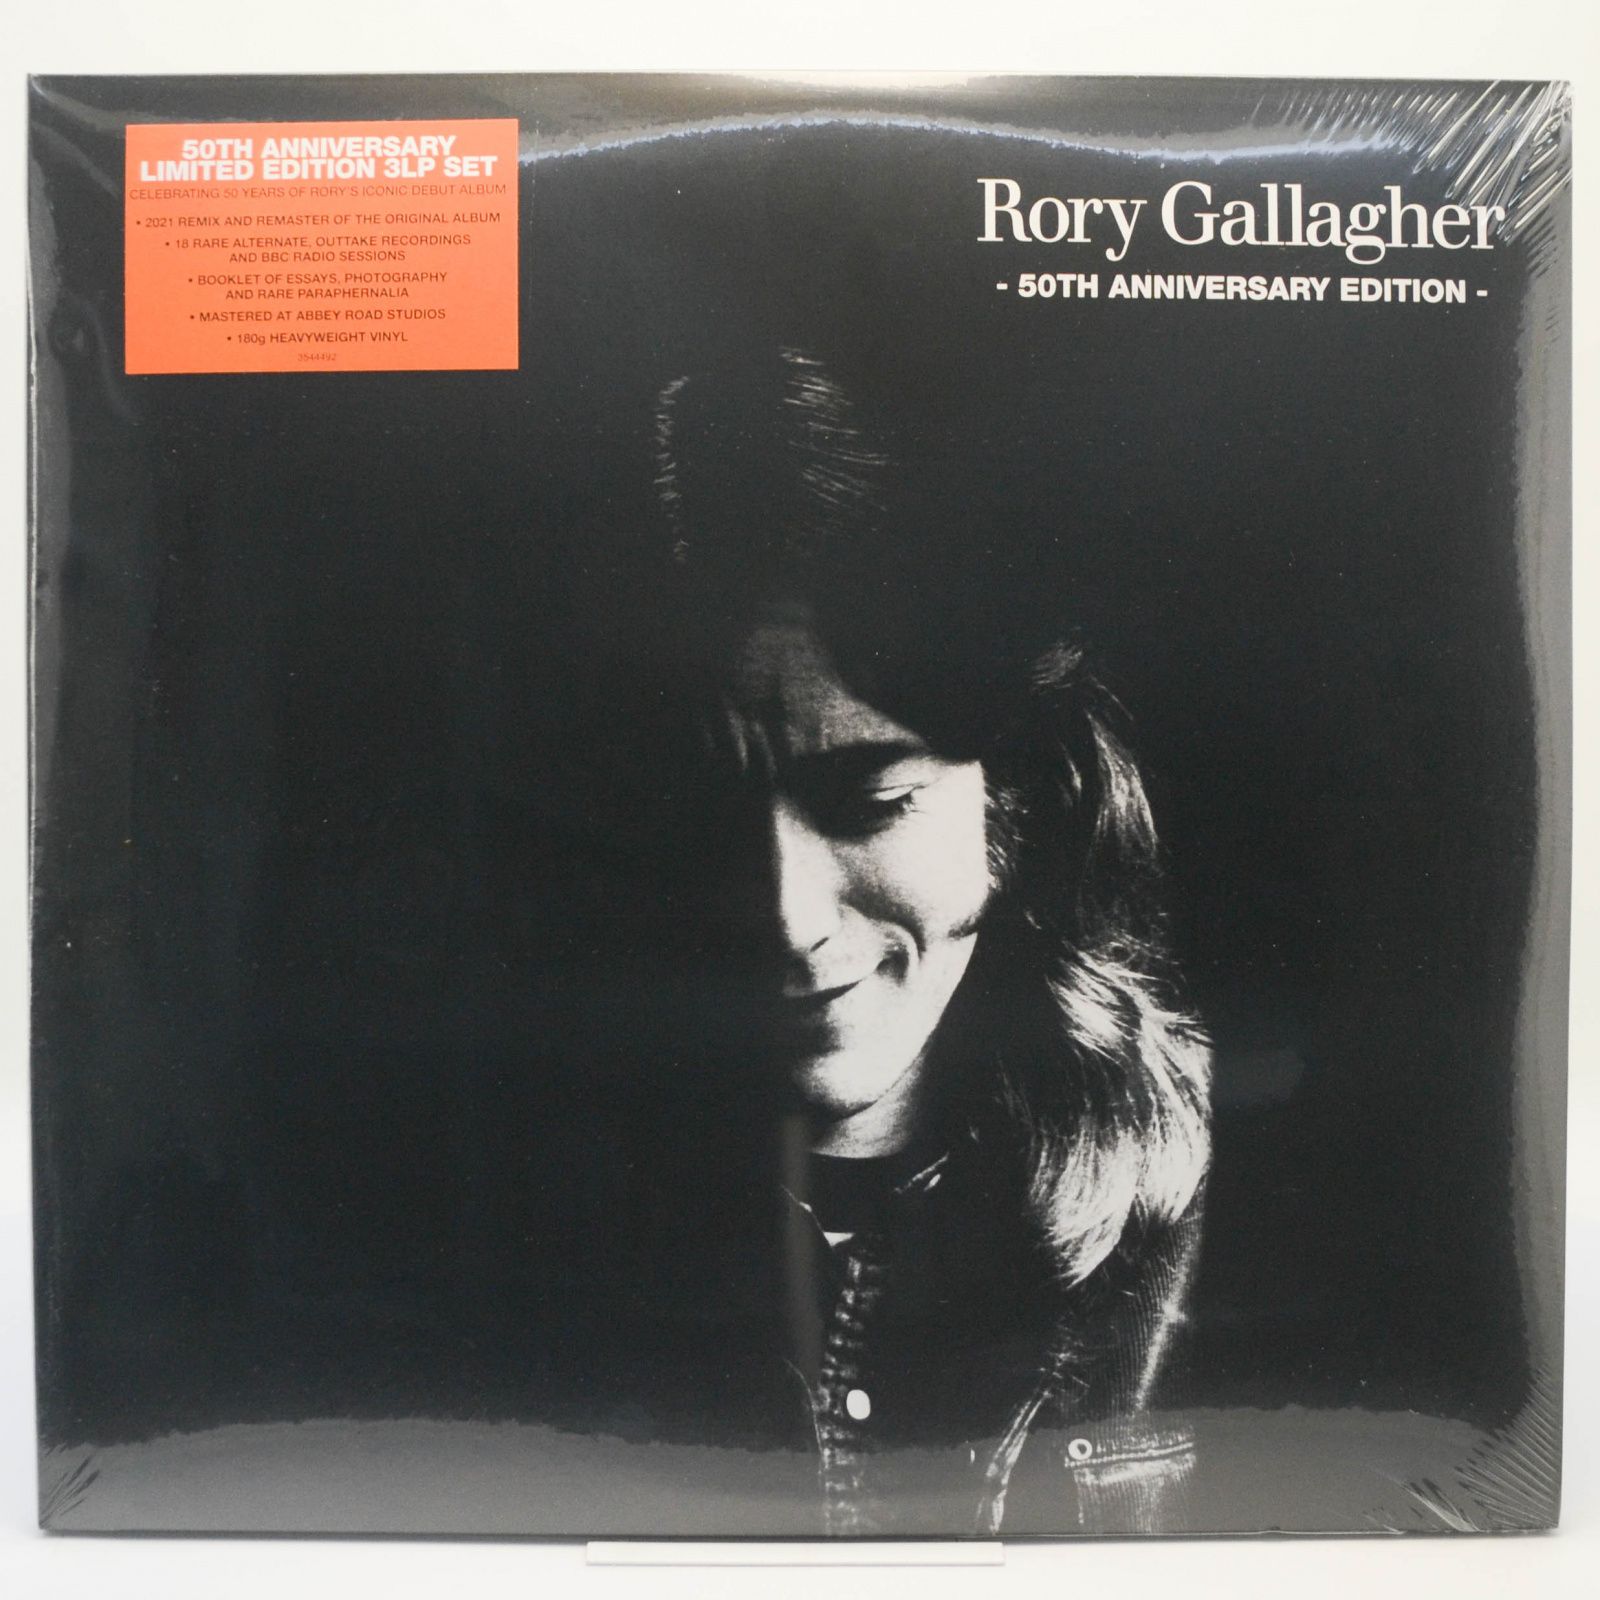 Rory Gallagher — Rory Gallagher - 50th Anniversary Edition - (3LP), 2021